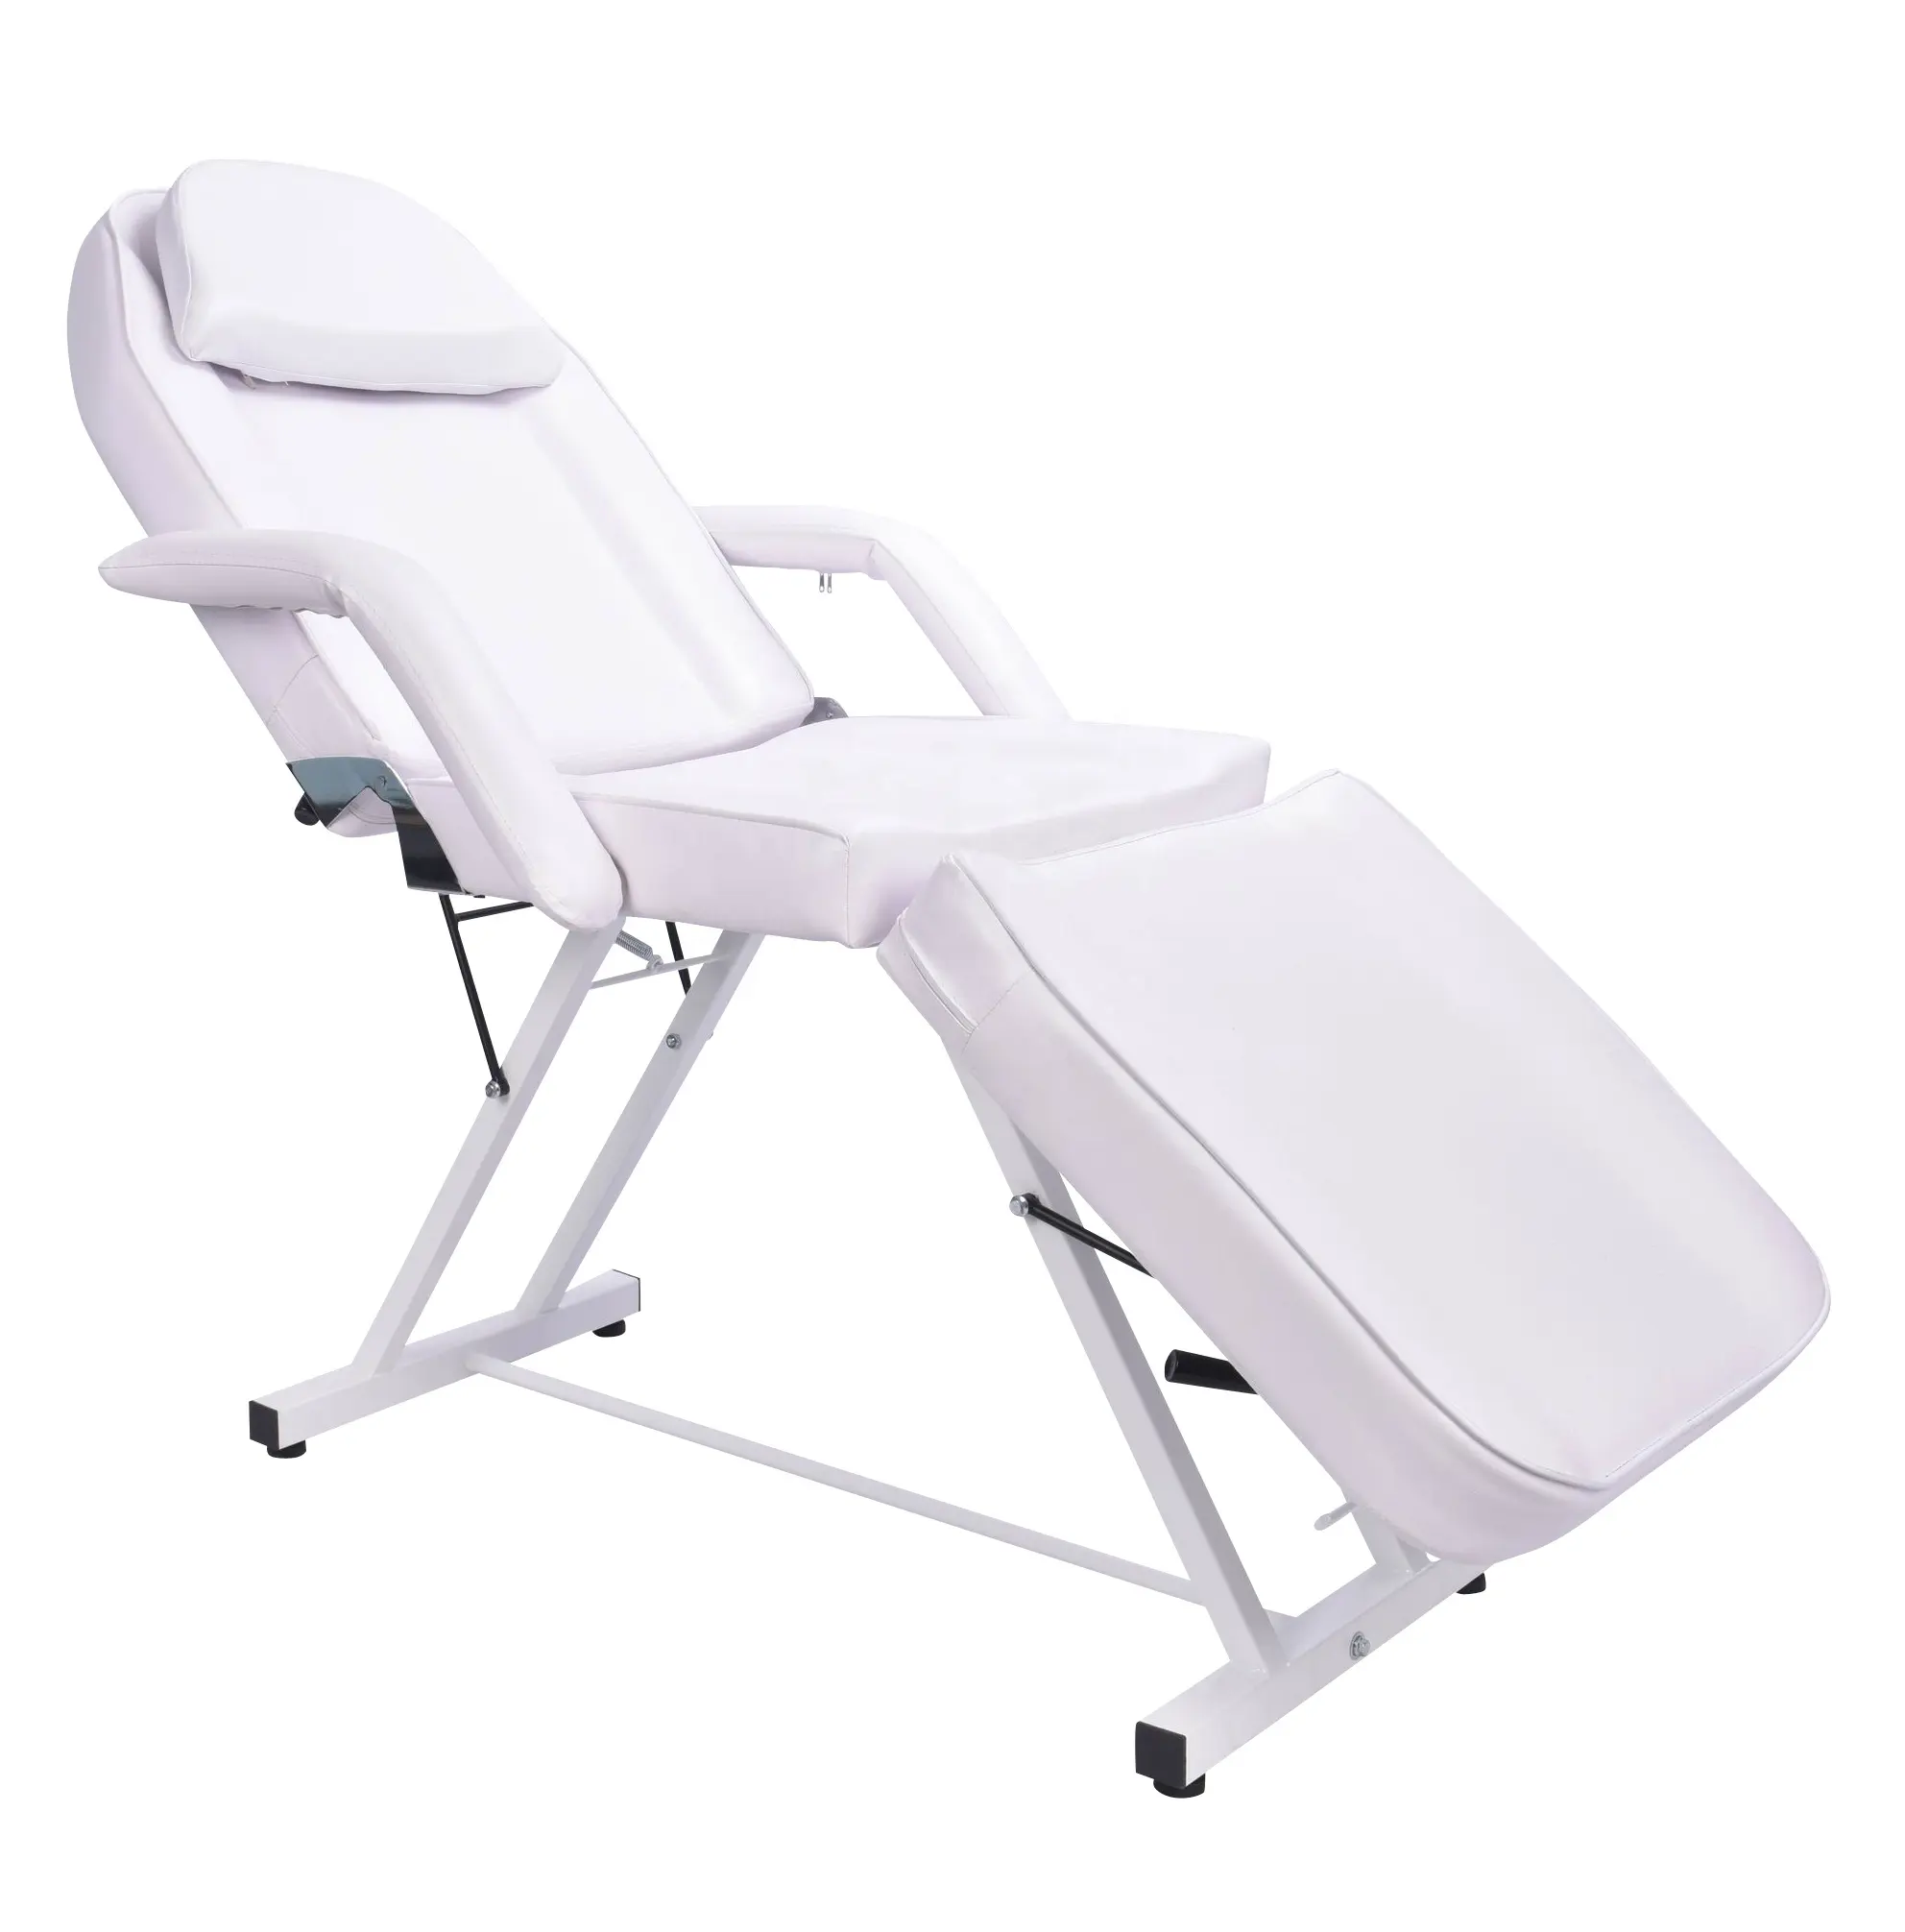 Facial bed beauty salon chair factory direct sale / white hydraulic spa bed for salon beauty / beauty chair salon furniture